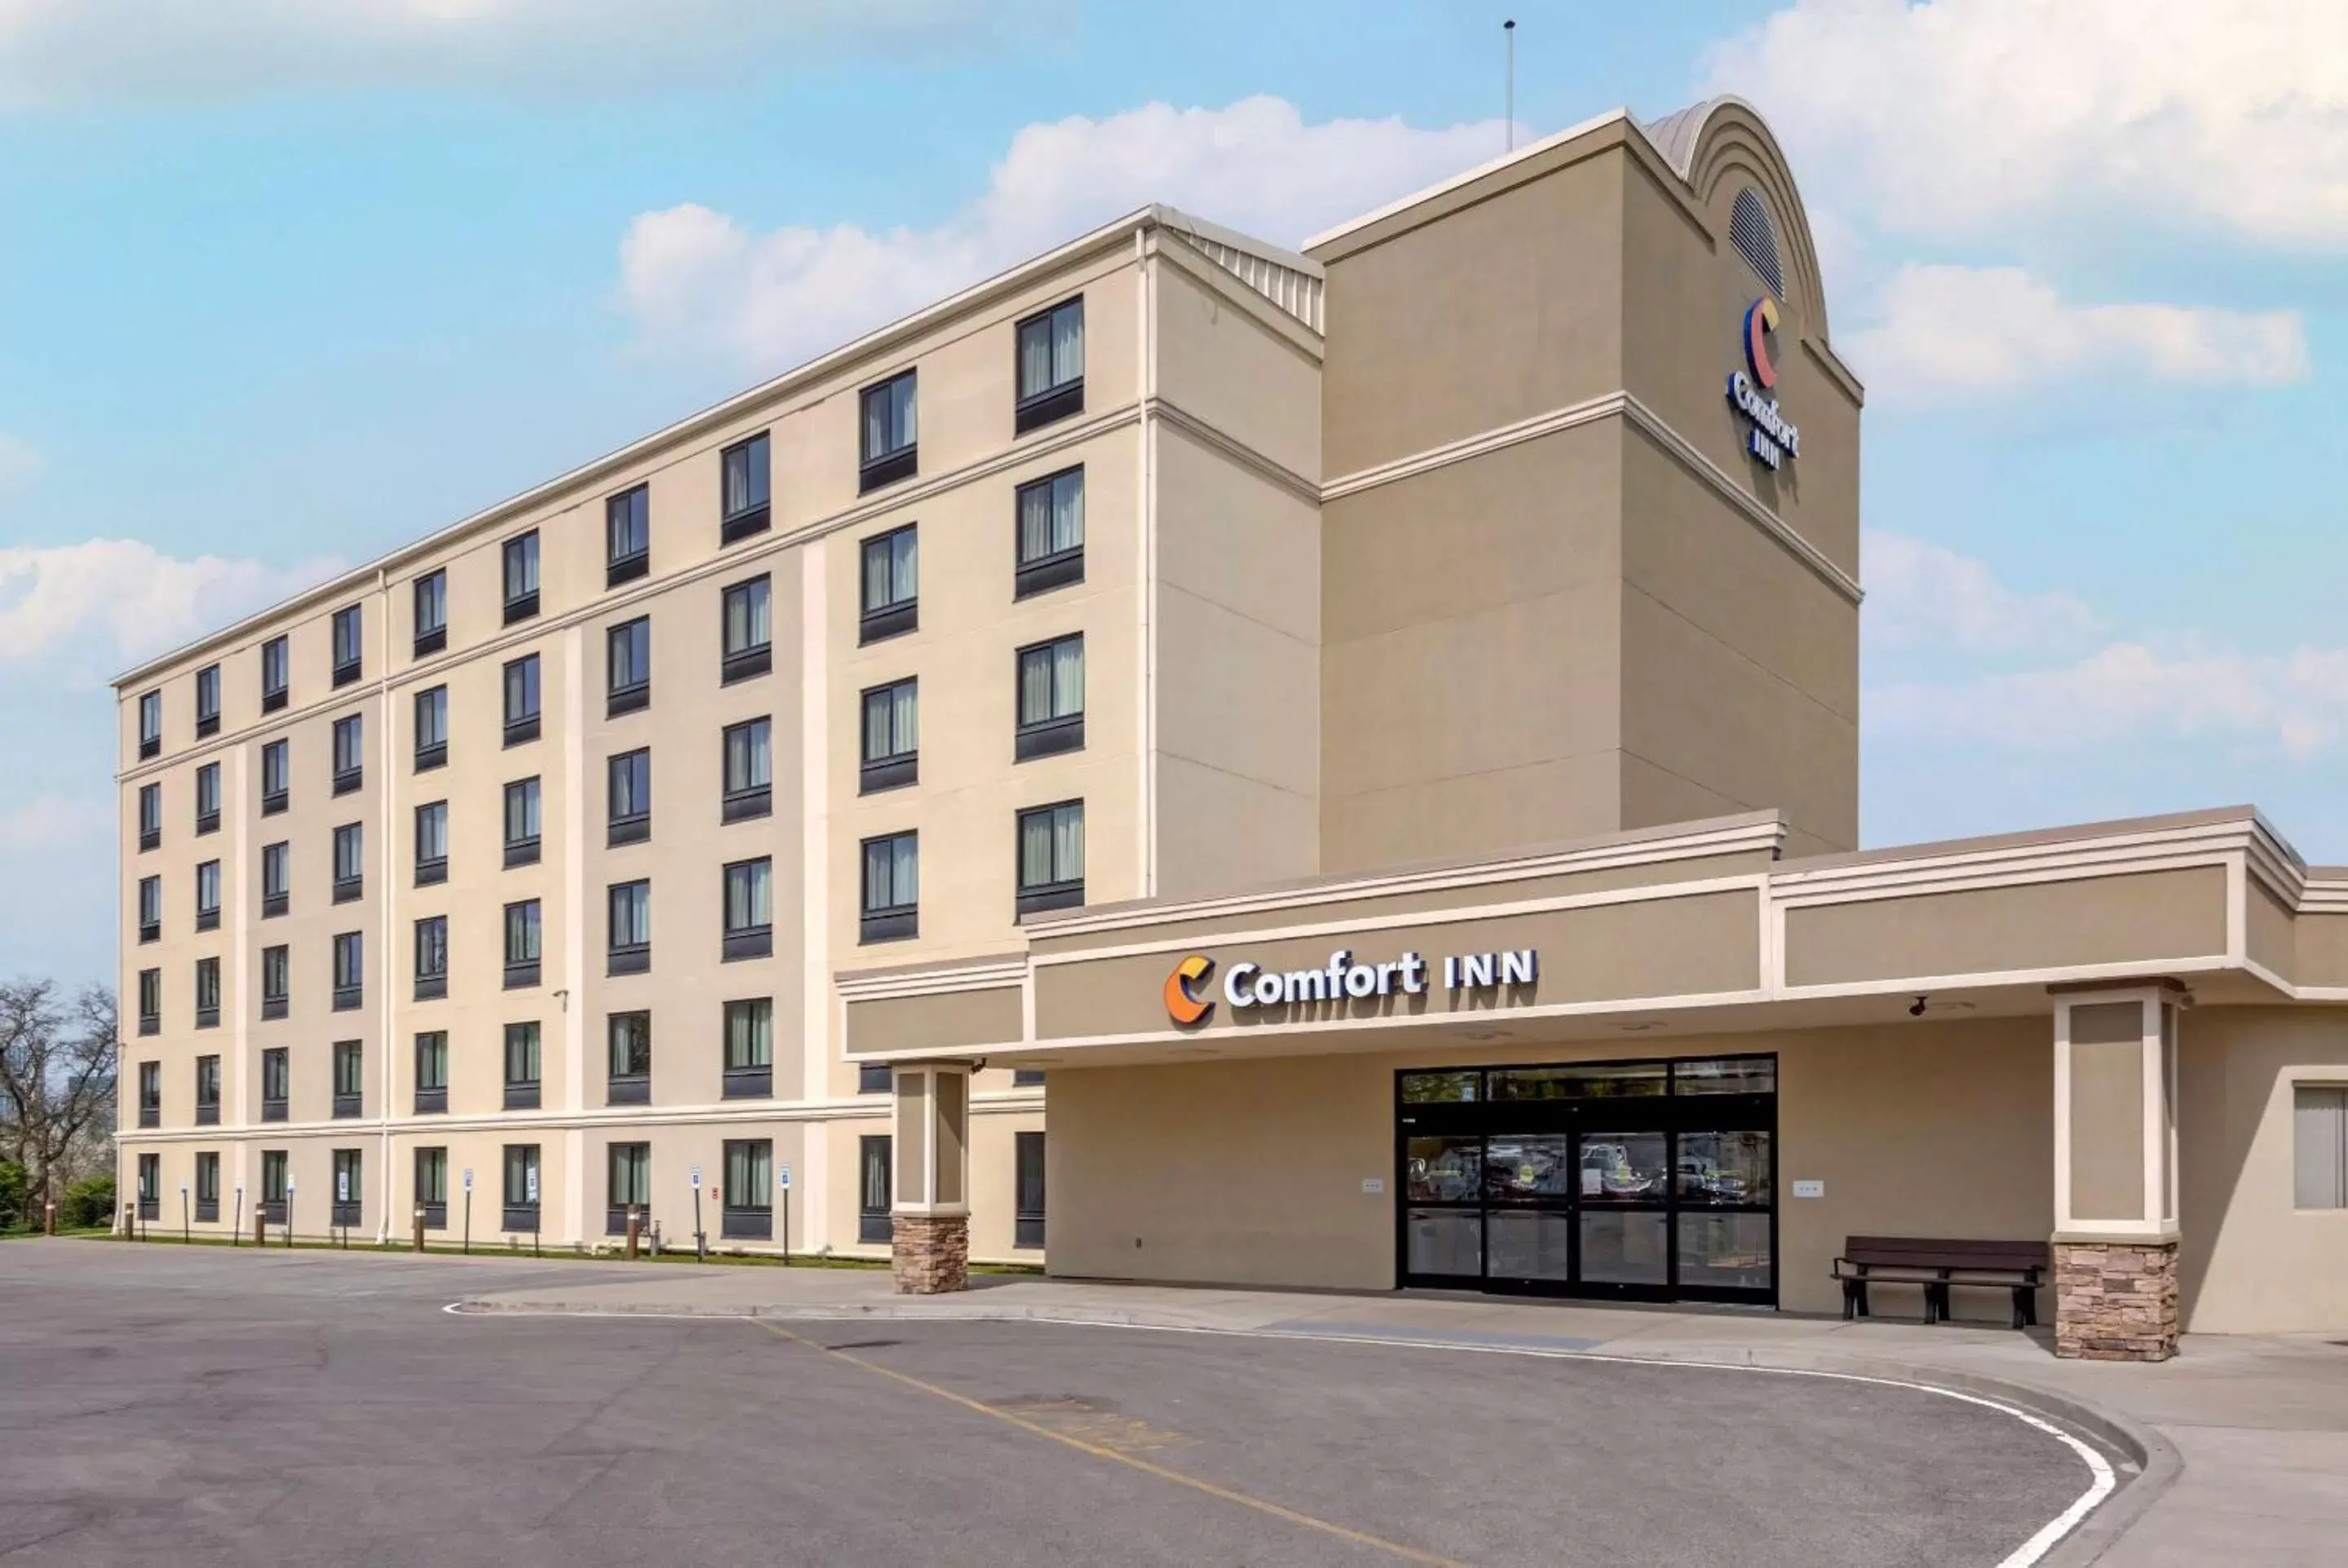 Property Building in Comfort Inn The Pointe